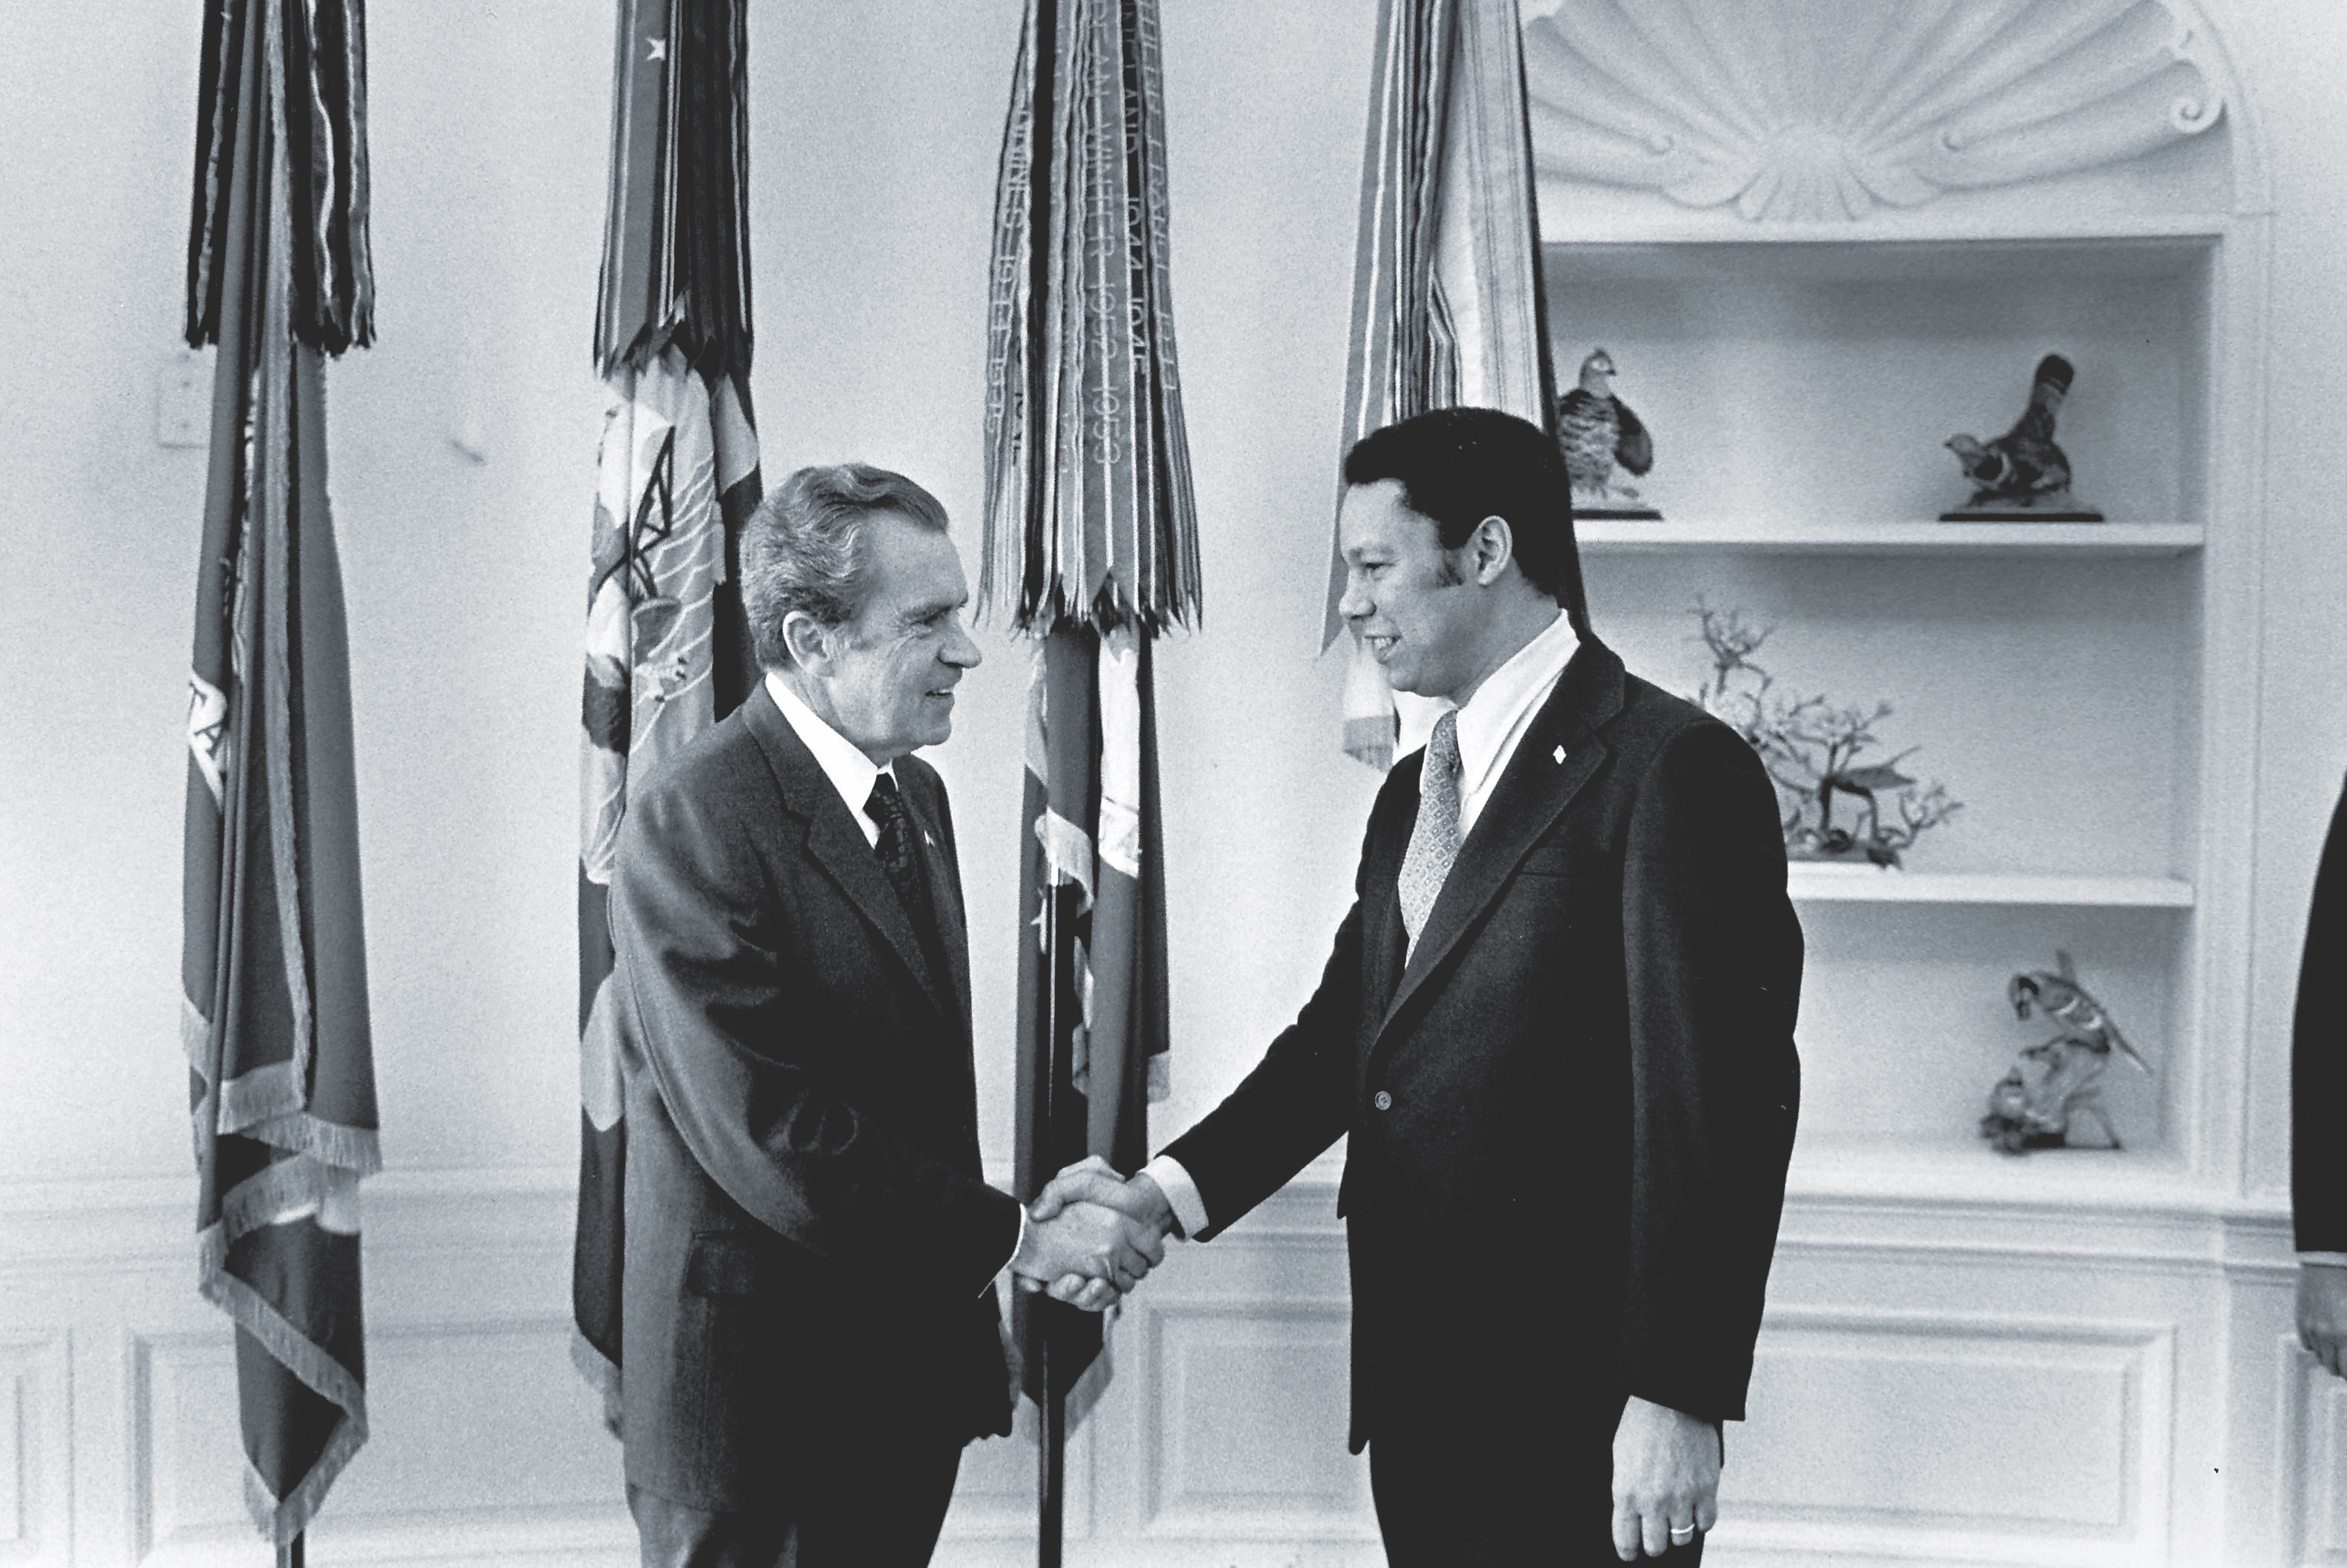 Powell meets Richard Nixon in the fall of 1972 after being selected as a White House Fellow. (Ollie Atkins/White House/The Life Picture Collection/Getty Images)